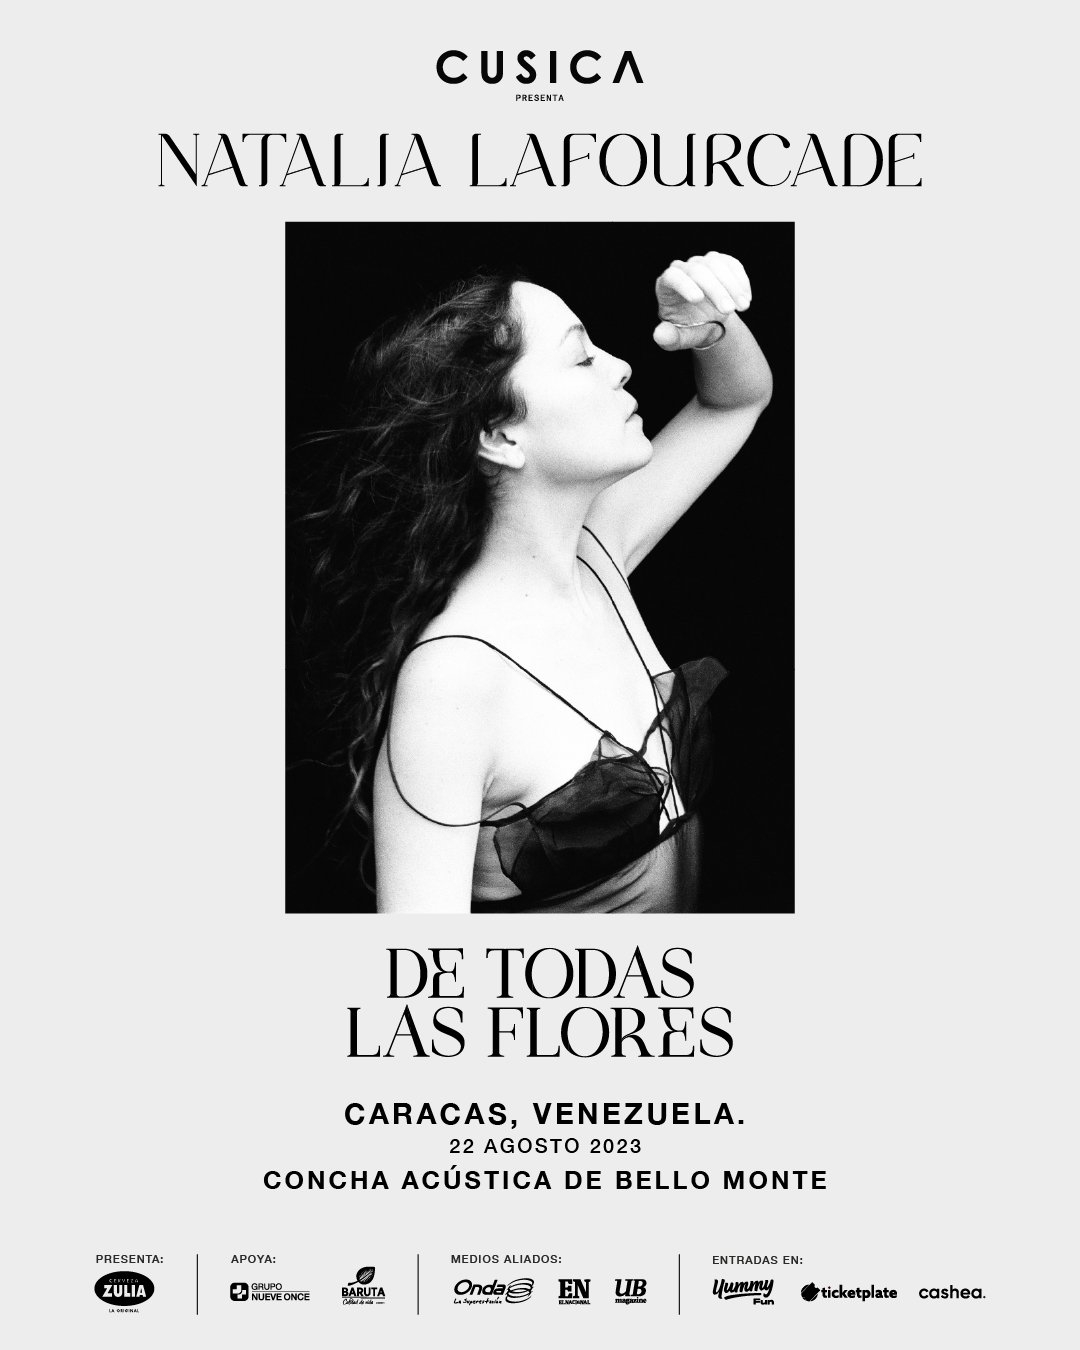 natalia-lafourcade-in-caracas-2023-when-is-her-concert-and-how-much